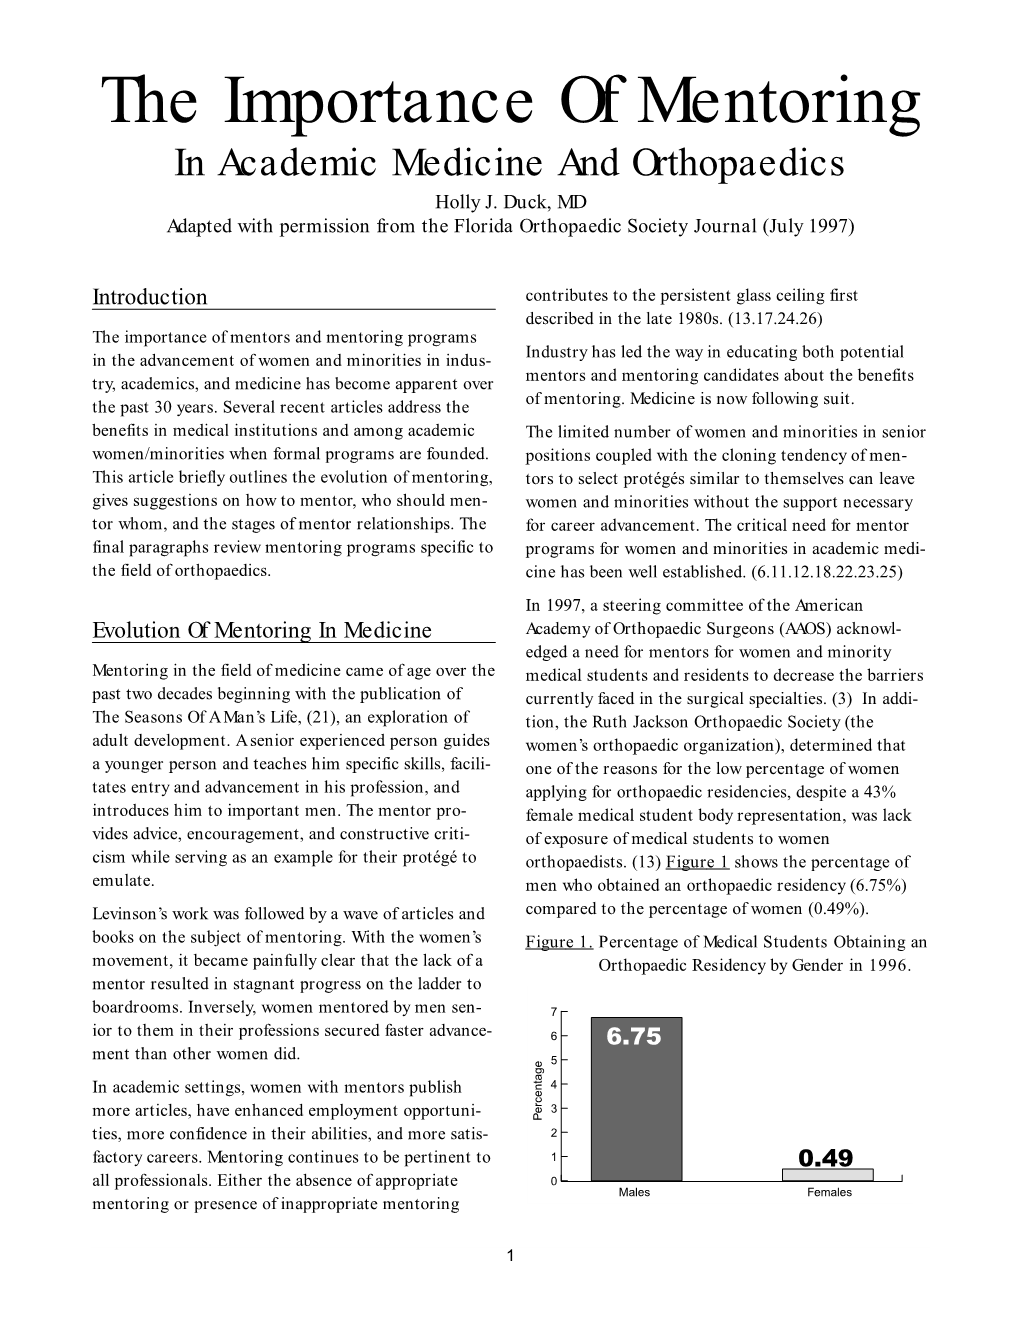 The Importance of Mentoring in Academic Medicine and Orthopaedics Holly J